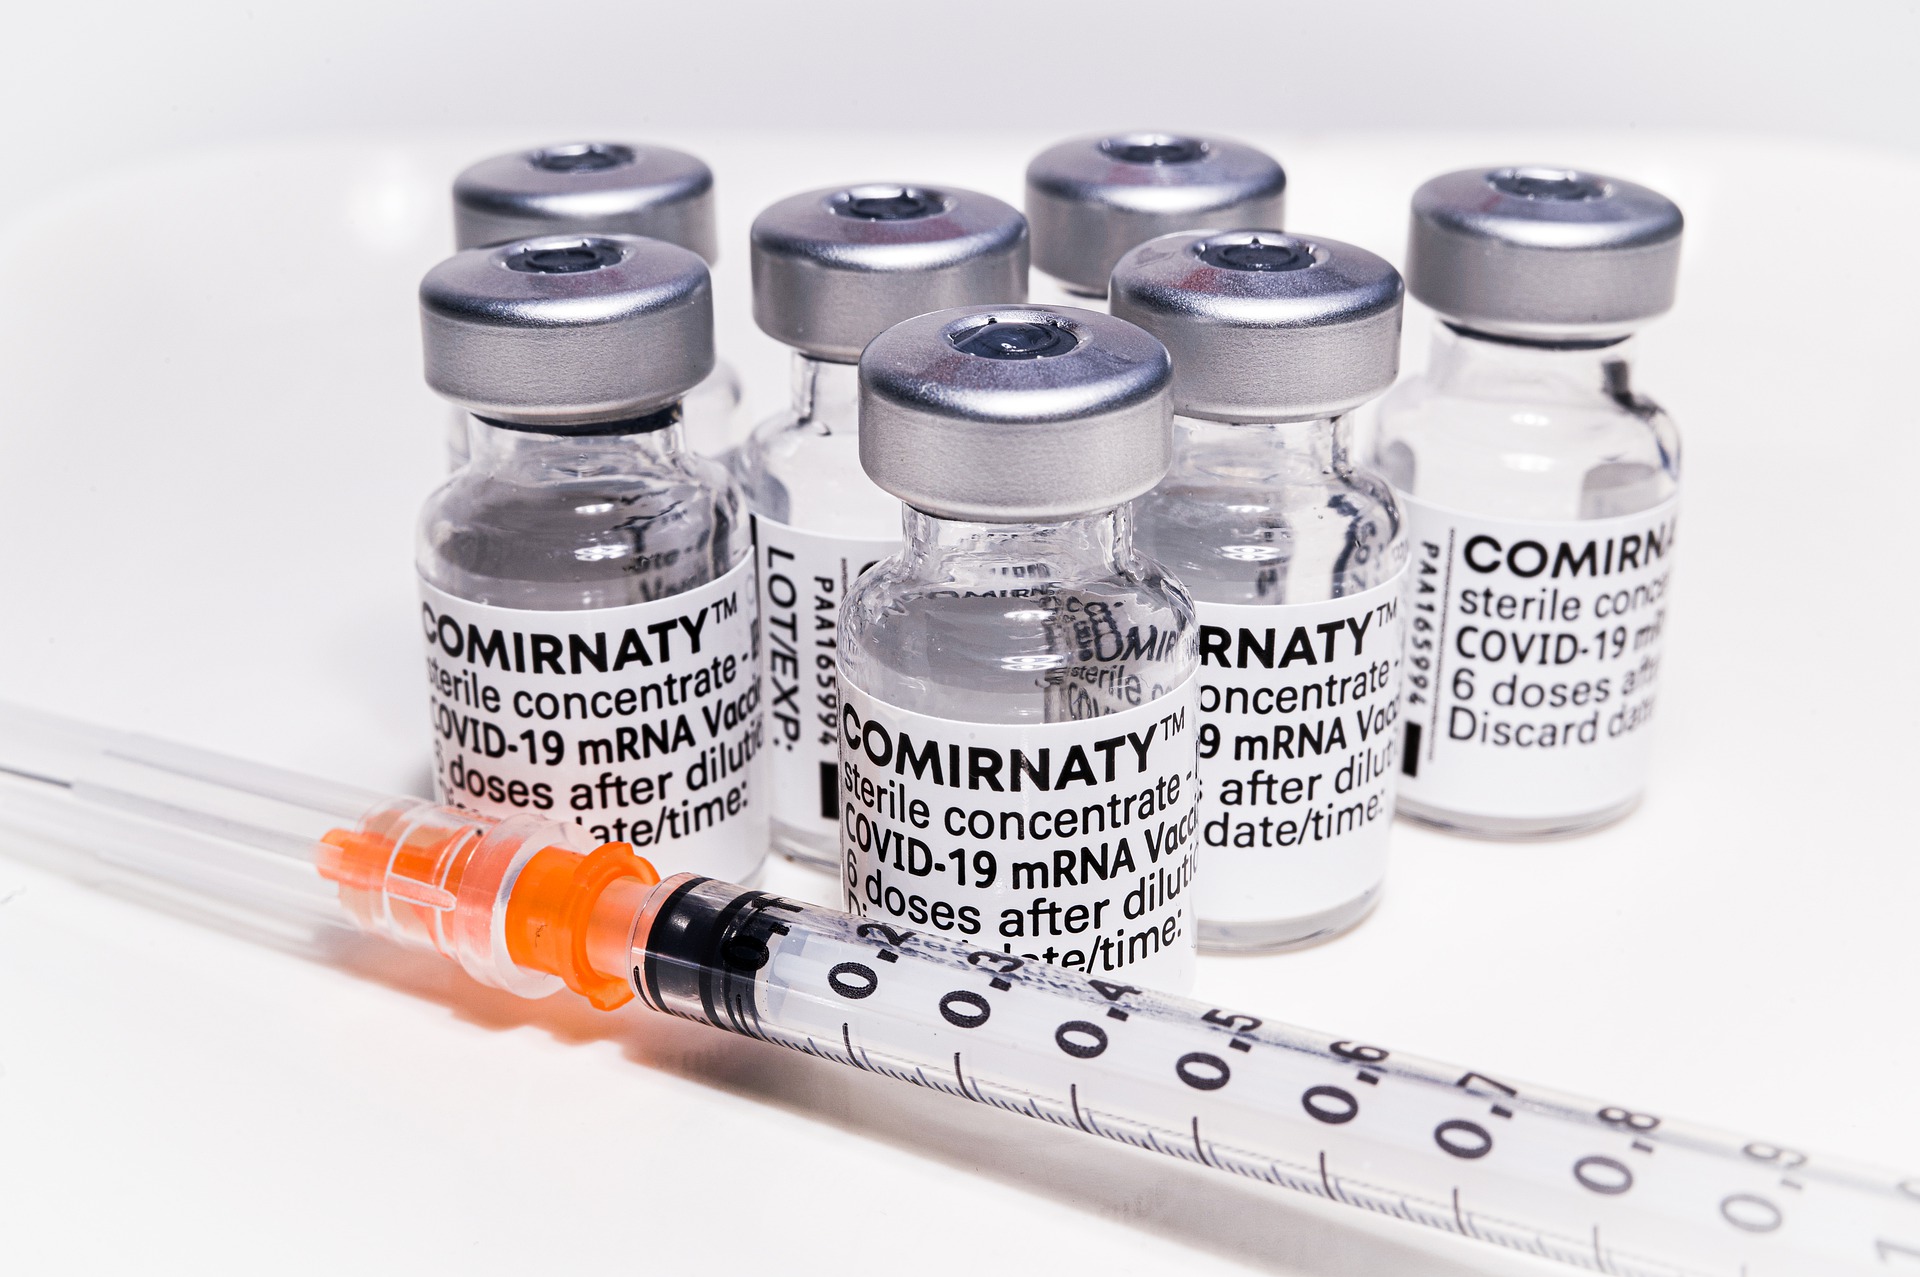 Pfizer COVID-19 vaccine - “COMIRNATY” - Image sourced from Pixabay/Pexels